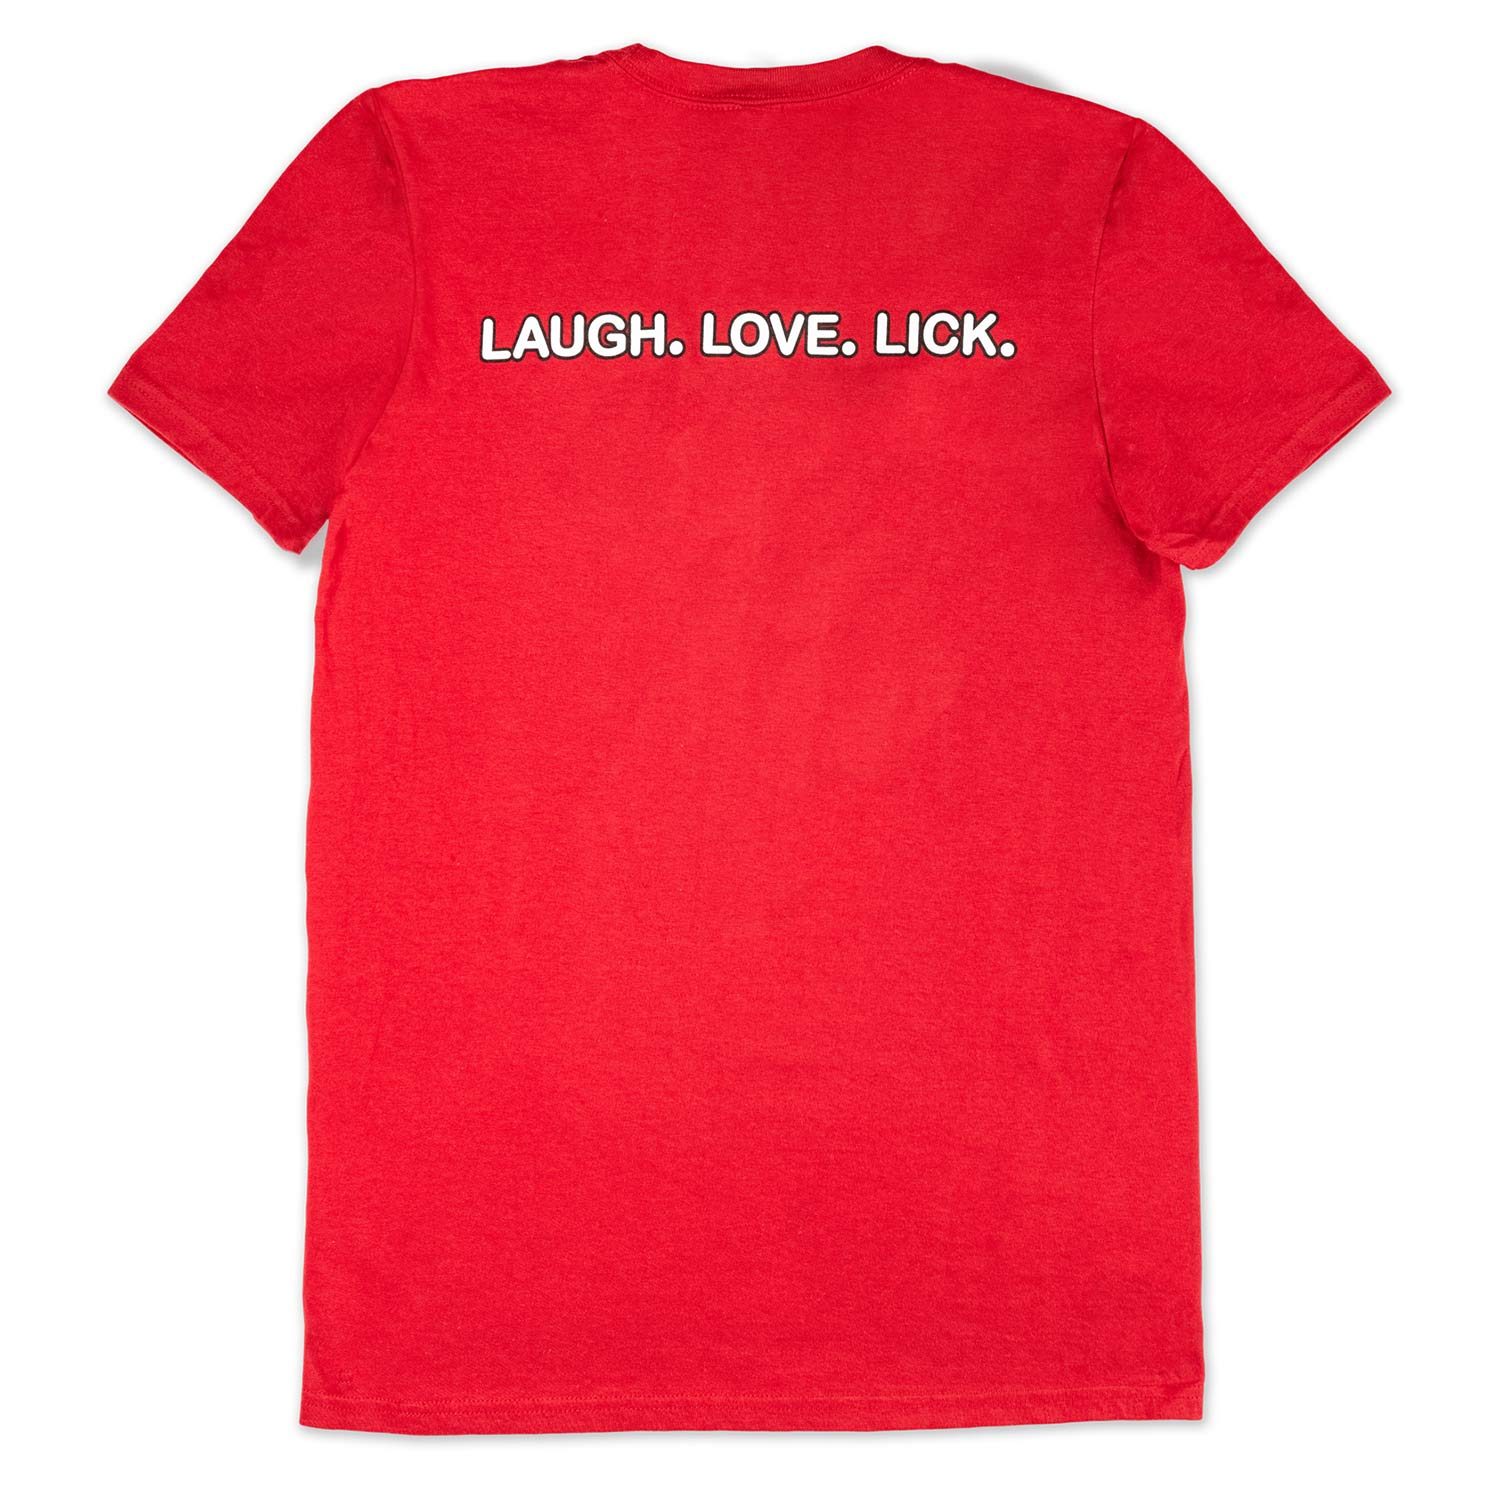 Love. Laugh. Lick. T (back) in independence red by Beau Tyler